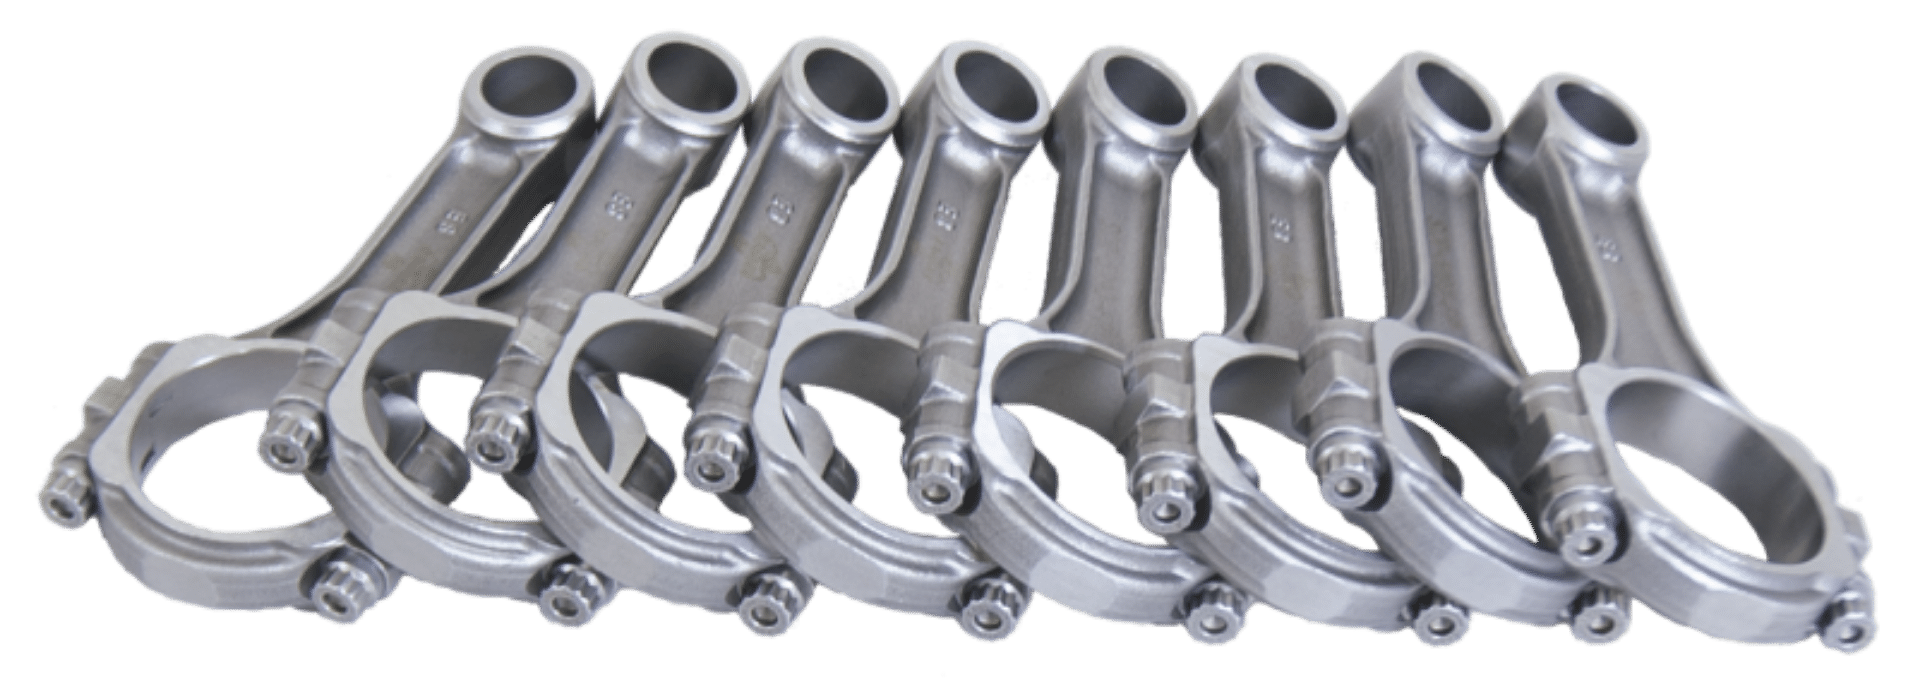 Picture of Eagle Ford 302 Standard I-Beam Connecting Rods Set of 8